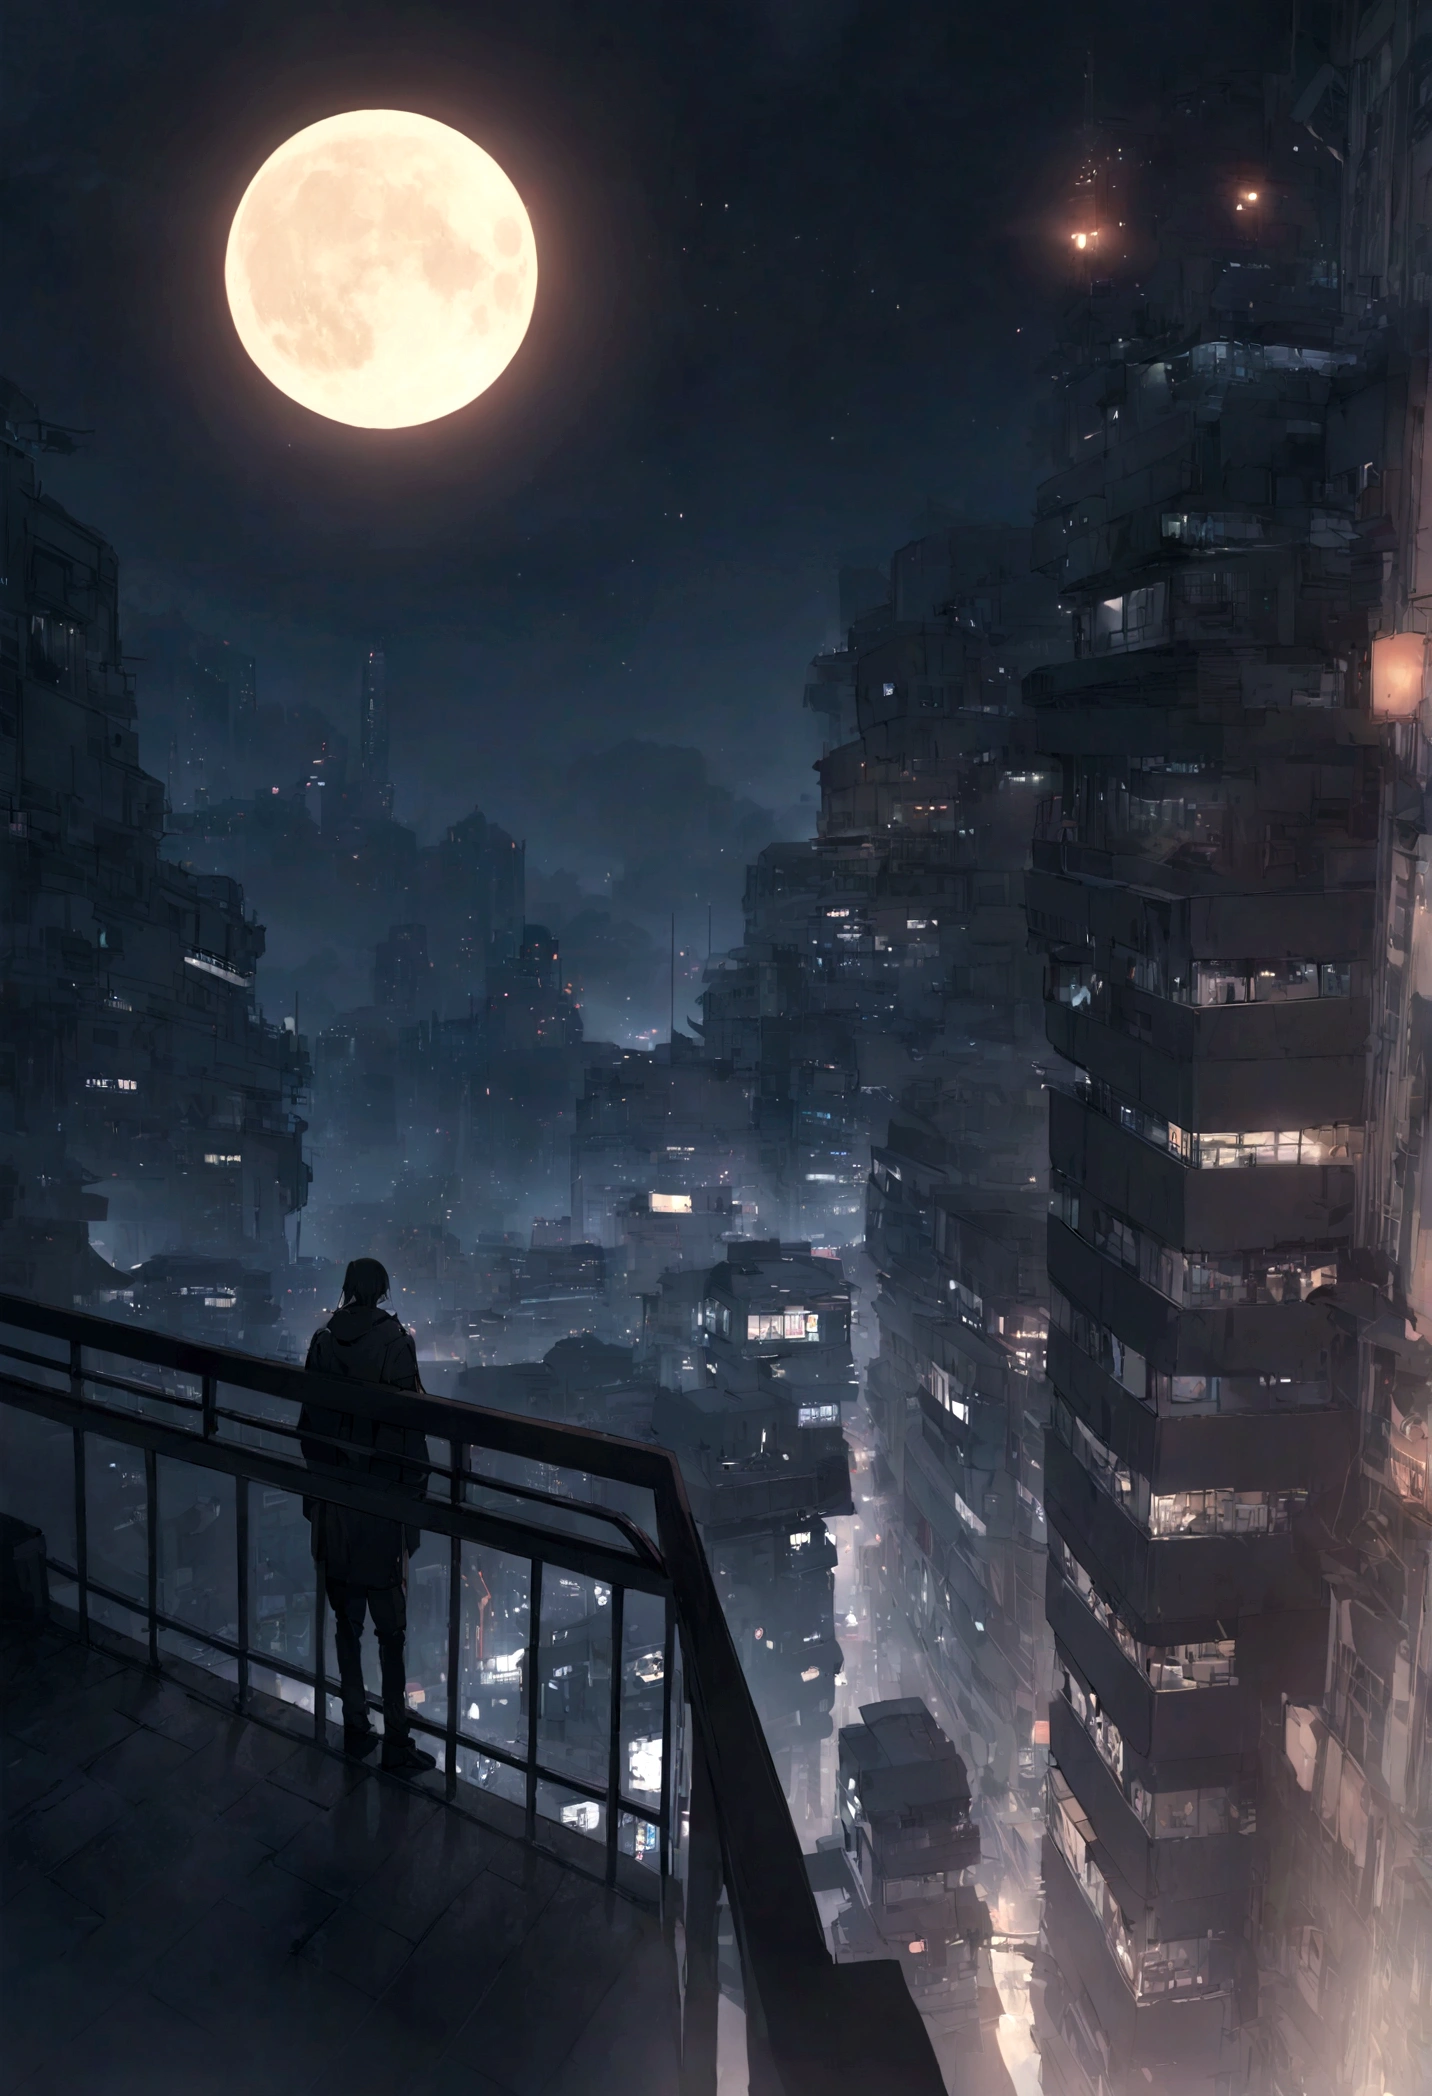 nighttime view of a man standing on a balcony looking at the Asia city, there is a moon above, pexels, digital art, looking at the city, looking over city, stunning moody cinematography, beautiful cinematography, overlooking a modern city, calm night. over shoulder shot, cyberpunk night street, cyberpunk street at night, busy cyberpunk metropolis, sci-fi cyberpunk city street